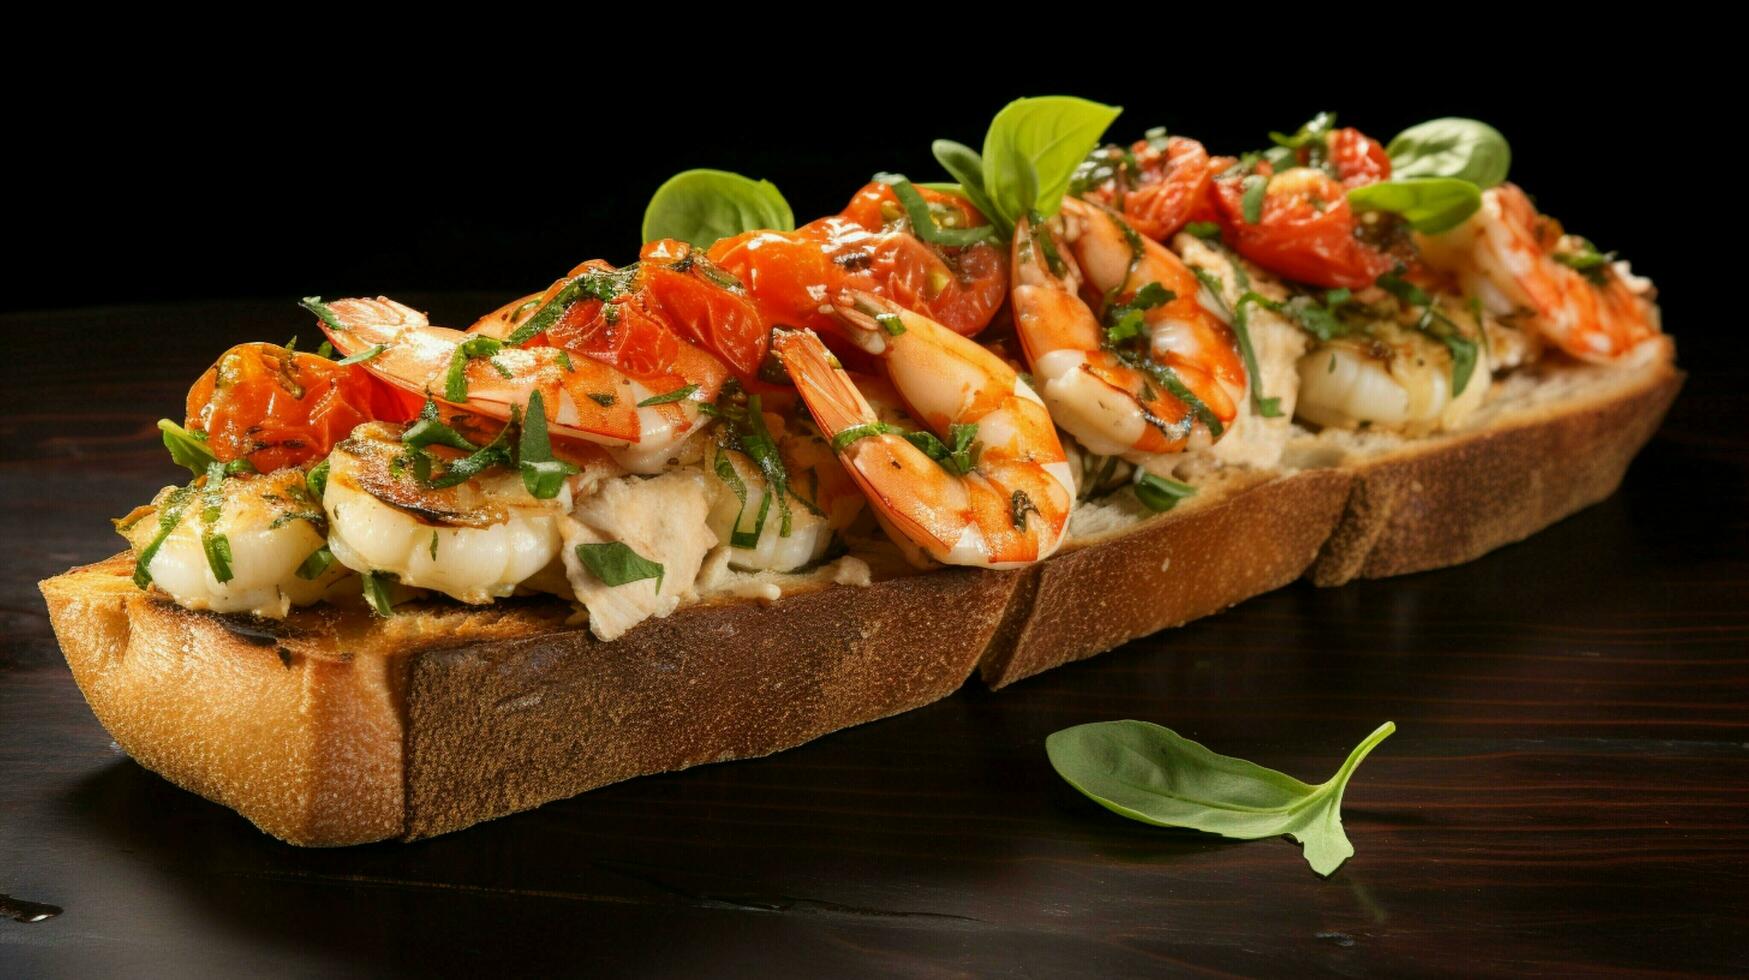 freshness and gourmet meal slice of grilled seafood photo